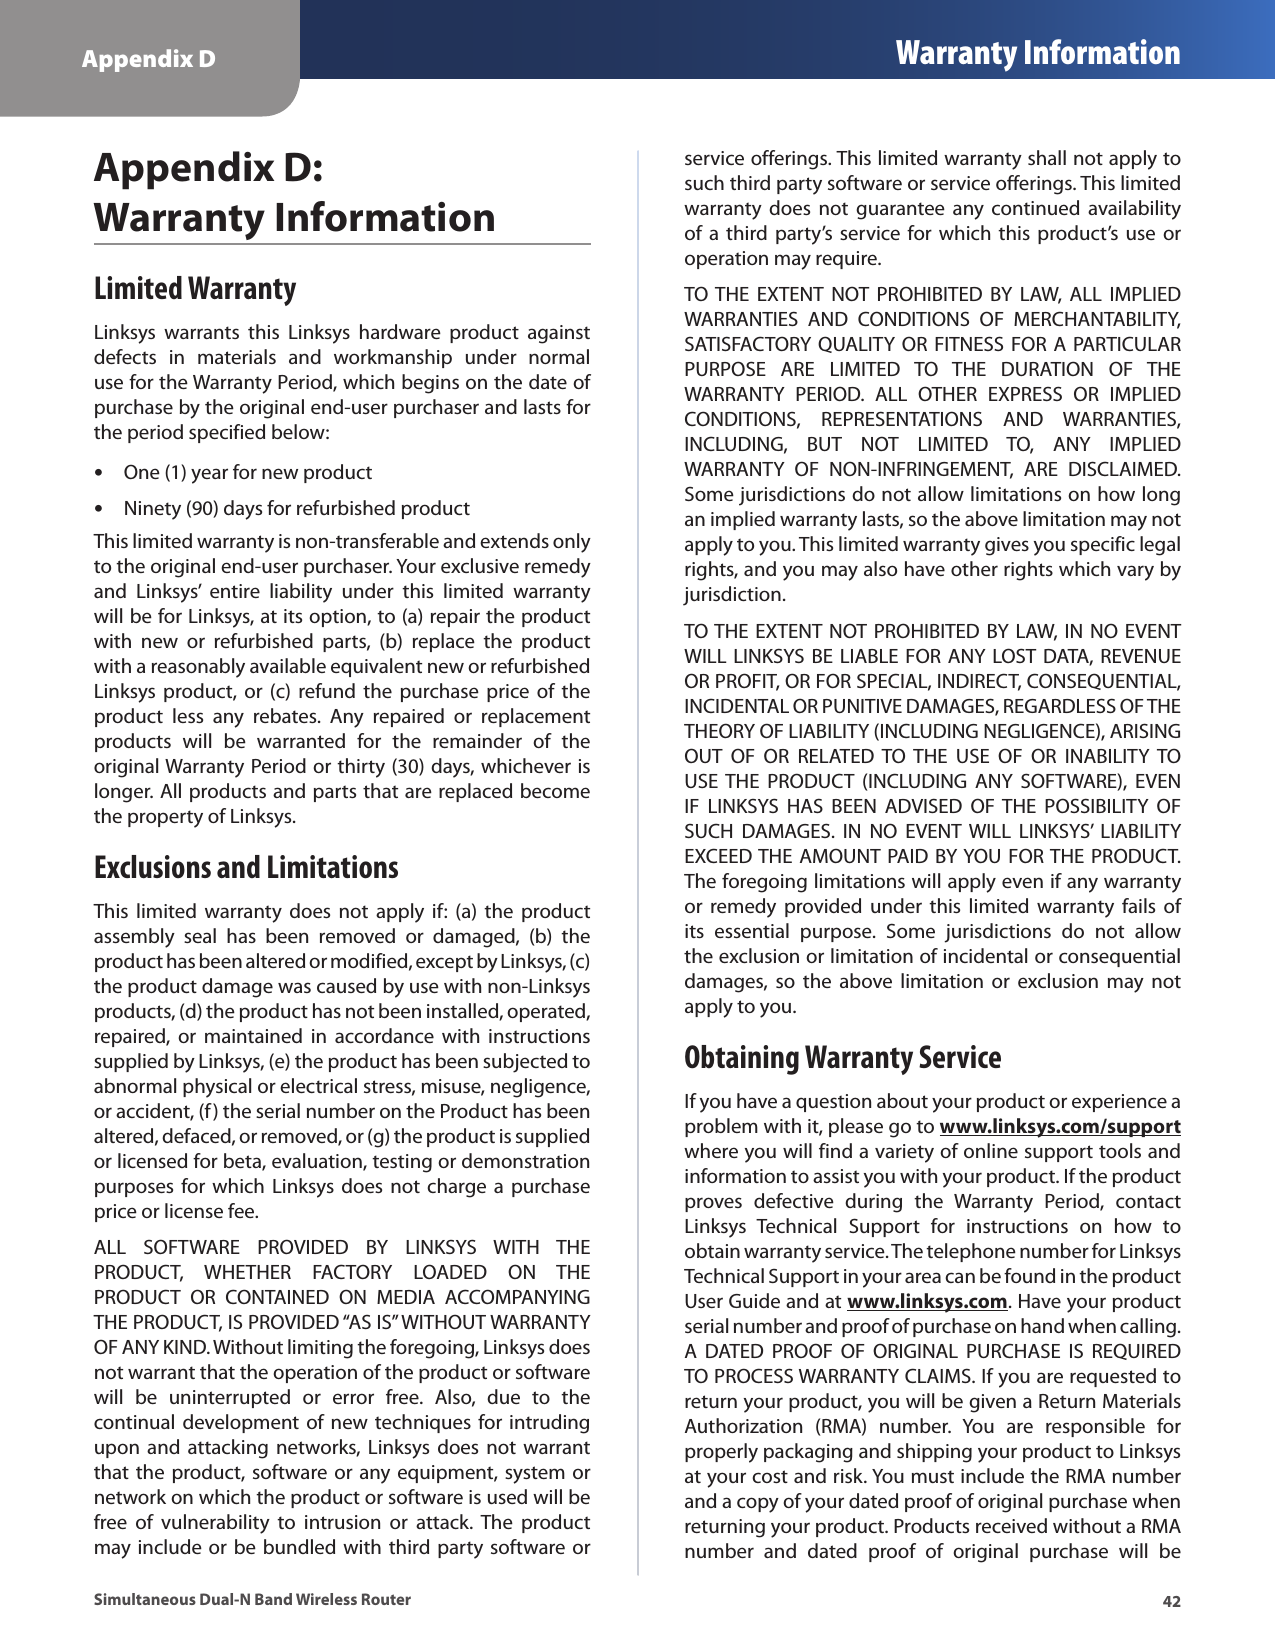 Appendix D Warranty Information42Simultaneous Dual-N Band Wireless RouterAppendix D:  Warranty InformationLimited WarrantyLinksys  warrants  this  Linksys  hardware  product  against defects  in  materials  and  workmanship  under  normal use for the Warranty Period, which begins on the date of purchase by the original end-user purchaser and lasts for the period specified below:One (1) year for new product •Ninety (90) days for refurbished product •This limited warranty is non-transferable and extends only to the original end-user purchaser. Your exclusive remedy and  Linksys’  entire  liability  under  this  limited  warranty will be for Linksys, at its option, to (a) repair the product with  new  or  refurbished  parts,  (b)  replace  the  product with a reasonably available equivalent new or refurbished Linksys product,  or  (c) refund  the purchase  price of  the product  less  any  rebates.  Any  repaired  or  replacement products  will  be  warranted  for  the  remainder  of  the original Warranty Period or thirty (30) days, whichever is longer. All products and parts that are replaced become the property of Linksys.Exclusions and LimitationsThis  limited  warranty  does  not  apply  if:  (a)  the  product assembly  seal  has  been  removed  or  damaged,  (b)  the product has been altered or modified, except by Linksys, (c) the product damage was caused by use with non-Linksys products, (d) the product has not been installed, operated, repaired,  or  maintained  in  accordance  with  instructions supplied by Linksys, (e) the product has been subjected to abnormal physical or electrical stress, misuse, negligence, or accident, (f) the serial number on the Product has been altered, defaced, or removed, or (g) the product is supplied or licensed for beta, evaluation, testing or demonstration purposes for which  Linksys does not  charge  a purchase price or license fee.ALL  SOFTWARE  PROVIDED  BY  LINKSYS  WITH  THE PRODUCT,  WHETHER  FACTORY  LOADED  ON  THE PRODUCT  OR  CONTAINED  ON  MEDIA  ACCOMPANYING THE PRODUCT, IS PROVIDED “AS IS” WITHOUT WARRANTY OF ANY KIND. Without limiting the foregoing, Linksys does not warrant that the operation of the product or software will  be  uninterrupted  or  error  free.  Also,  due  to  the continual development of new  techniques for intruding upon and  attacking  networks, Linksys does  not warrant that the product, software or any equipment, system or network on which the product or software is used will be free  of  vulnerability  to  intrusion  or  attack.  The  product may include or be bundled with third party software or service offerings. This limited warranty shall not apply to such third party software or service offerings. This limited warranty  does  not  guarantee  any  continued  availability of a  third party’s  service for which  this product’s  use or operation may require. TO THE  EXTENT  NOT  PROHIBITED  BY  LAW,  ALL  IMPLIED WARRANTIES  AND  CONDITIONS  OF  MERCHANTABILITY, SATISFACTORY QUALITY OR FITNESS FOR A PARTICULAR PURPOSE  ARE  LIMITED  TO  THE  DURATION  OF  THE WARRANTY  PERIOD.  ALL  OTHER  EXPRESS  OR  IMPLIED CONDITIONS,  REPRESENTATIONS  AND  WARRANTIES, INCLUDING,  BUT  NOT  LIMITED  TO,  ANY  IMPLIED WARRANTY  OF  NON-INFRINGEMENT,  ARE  DISCLAIMED. Some jurisdictions do not allow limitations on how long an implied warranty lasts, so the above limitation may not apply to you. This limited warranty gives you specific legal rights, and you may also have other rights which vary by jurisdiction.TO THE EXTENT NOT PROHIBITED BY LAW, IN NO EVENT WILL LINKSYS BE LIABLE FOR ANY LOST DATA, REVENUE OR PROFIT, OR FOR SPECIAL, INDIRECT, CONSEQUENTIAL, INCIDENTAL OR PUNITIVE DAMAGES, REGARDLESS OF THE THEORY OF LIABILITY (INCLUDING NEGLIGENCE), ARISING OUT  OF  OR  RELATED  TO THE  USE  OF  OR  INABILITY  TO USE THE  PRODUCT  (INCLUDING  ANY  SOFTWARE),  EVEN IF  LINKSYS  HAS  BEEN  ADVISED  OF THE  POSSIBILITY  OF SUCH  DAMAGES.  IN  NO  EVENT WILL  LINKSYS’  LIABILITY EXCEED THE AMOUNT PAID  BY YOU FOR THE  PRODUCT. The foregoing limitations will apply even if any warranty or  remedy  provided  under  this  limited  warranty  fails  of its  essential  purpose.  Some  jurisdictions  do  not  allow the exclusion or limitation of incidental or consequential damages,  so  the  above  limitation  or  exclusion  may  not apply to you.Obtaining Warranty ServiceIf you have a question about your product or experience a problem with it, please go to www.linksys.com/support where you will find a variety of online support tools and information to assist you with your product. If the product proves  defective  during  the  Warranty  Period,  contact Linksys  Technical  Support  for  instructions  on  how  to obtain warranty service. The telephone number for Linksys Technical Support in your area can be found in the product User Guide and at www.linksys.com. Have your product serial number and proof of purchase on hand when calling. A  DATED  PROOF  OF  ORIGINAL  PURCHASE  IS  REQUIRED TO PROCESS WARRANTY CLAIMS. If you are requested to return your product, you will be given a Return Materials Authorization  (RMA)  number.  You  are  responsible  for properly packaging and shipping your product to Linksys at your cost and risk. You must include the RMA number and a copy of your dated proof of original purchase when returning your product. Products received without a RMA number  and  dated  proof  of  original  purchase  will  be 